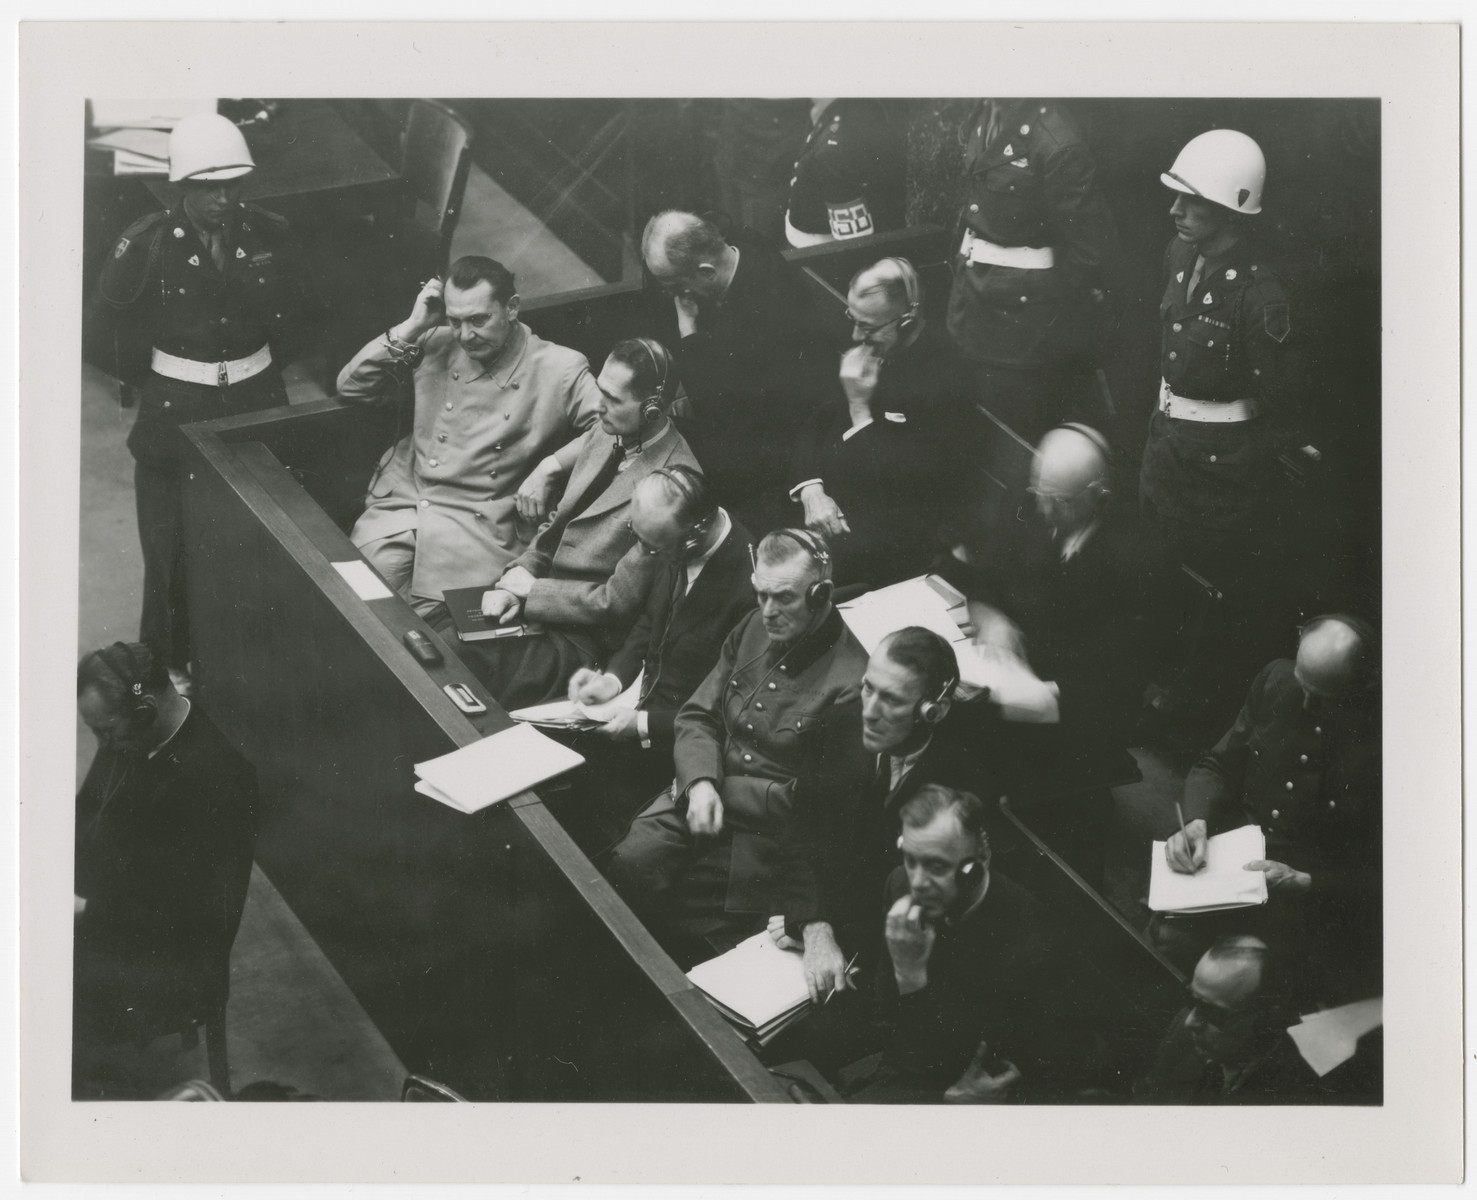 Photograph of the defendant's dock at the International Military Tribune in Nuremberg. 

Seated in front row from left to right: Goering, Hess, von Ribbentrop, Keitel, Kaltenbrunner and Rosenberg.